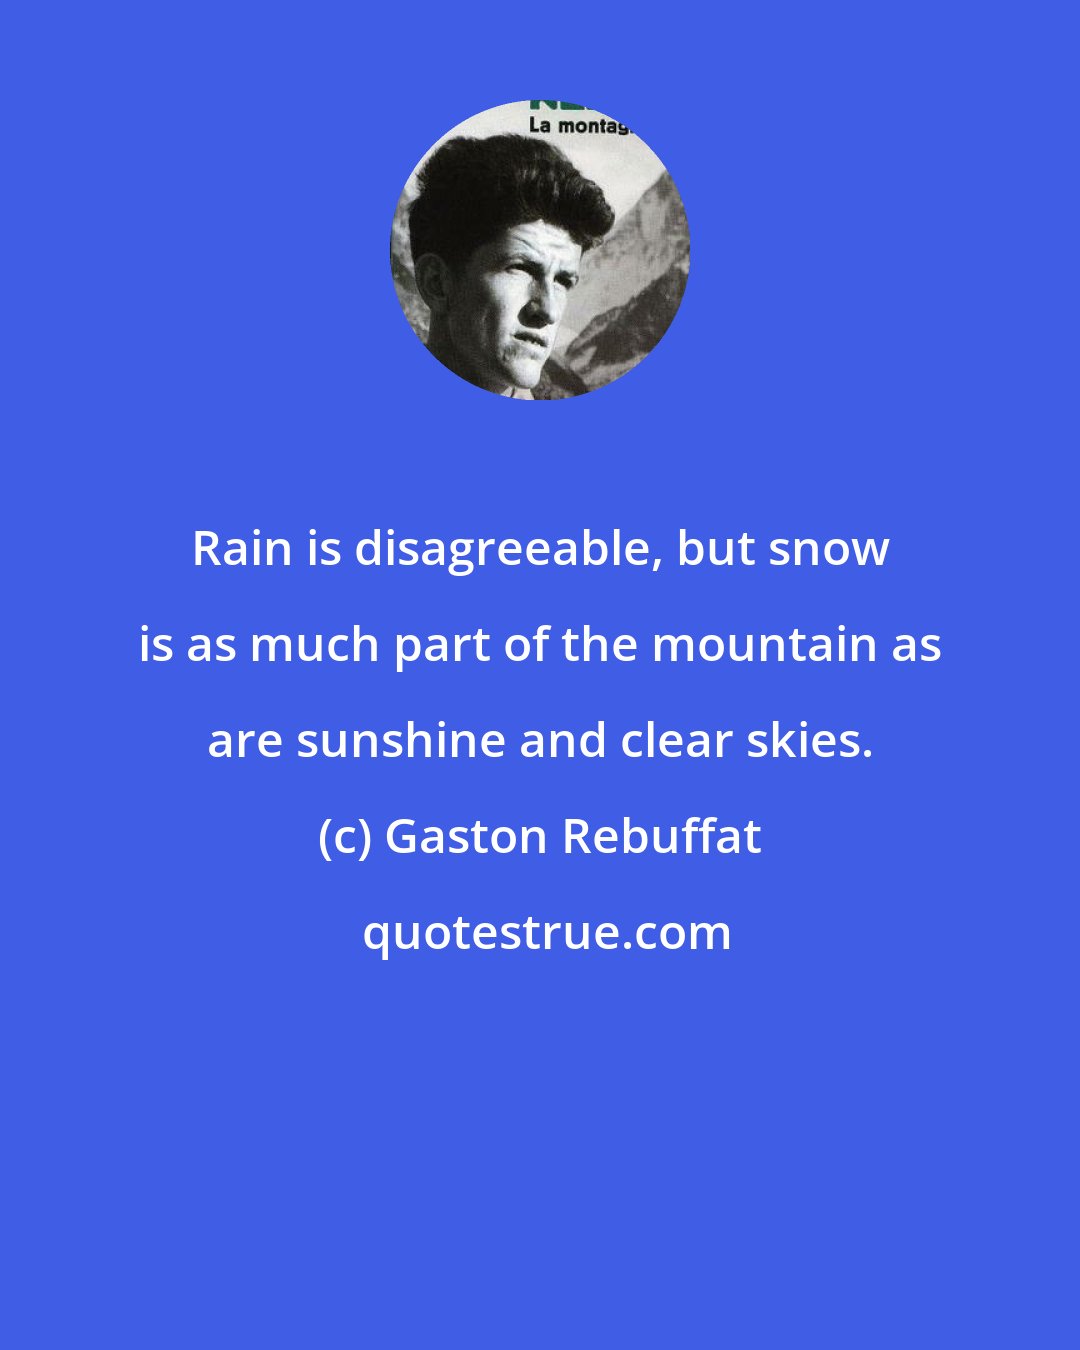 Gaston Rebuffat: Rain is disagreeable, but snow is as much part of the mountain as are sunshine and clear skies.